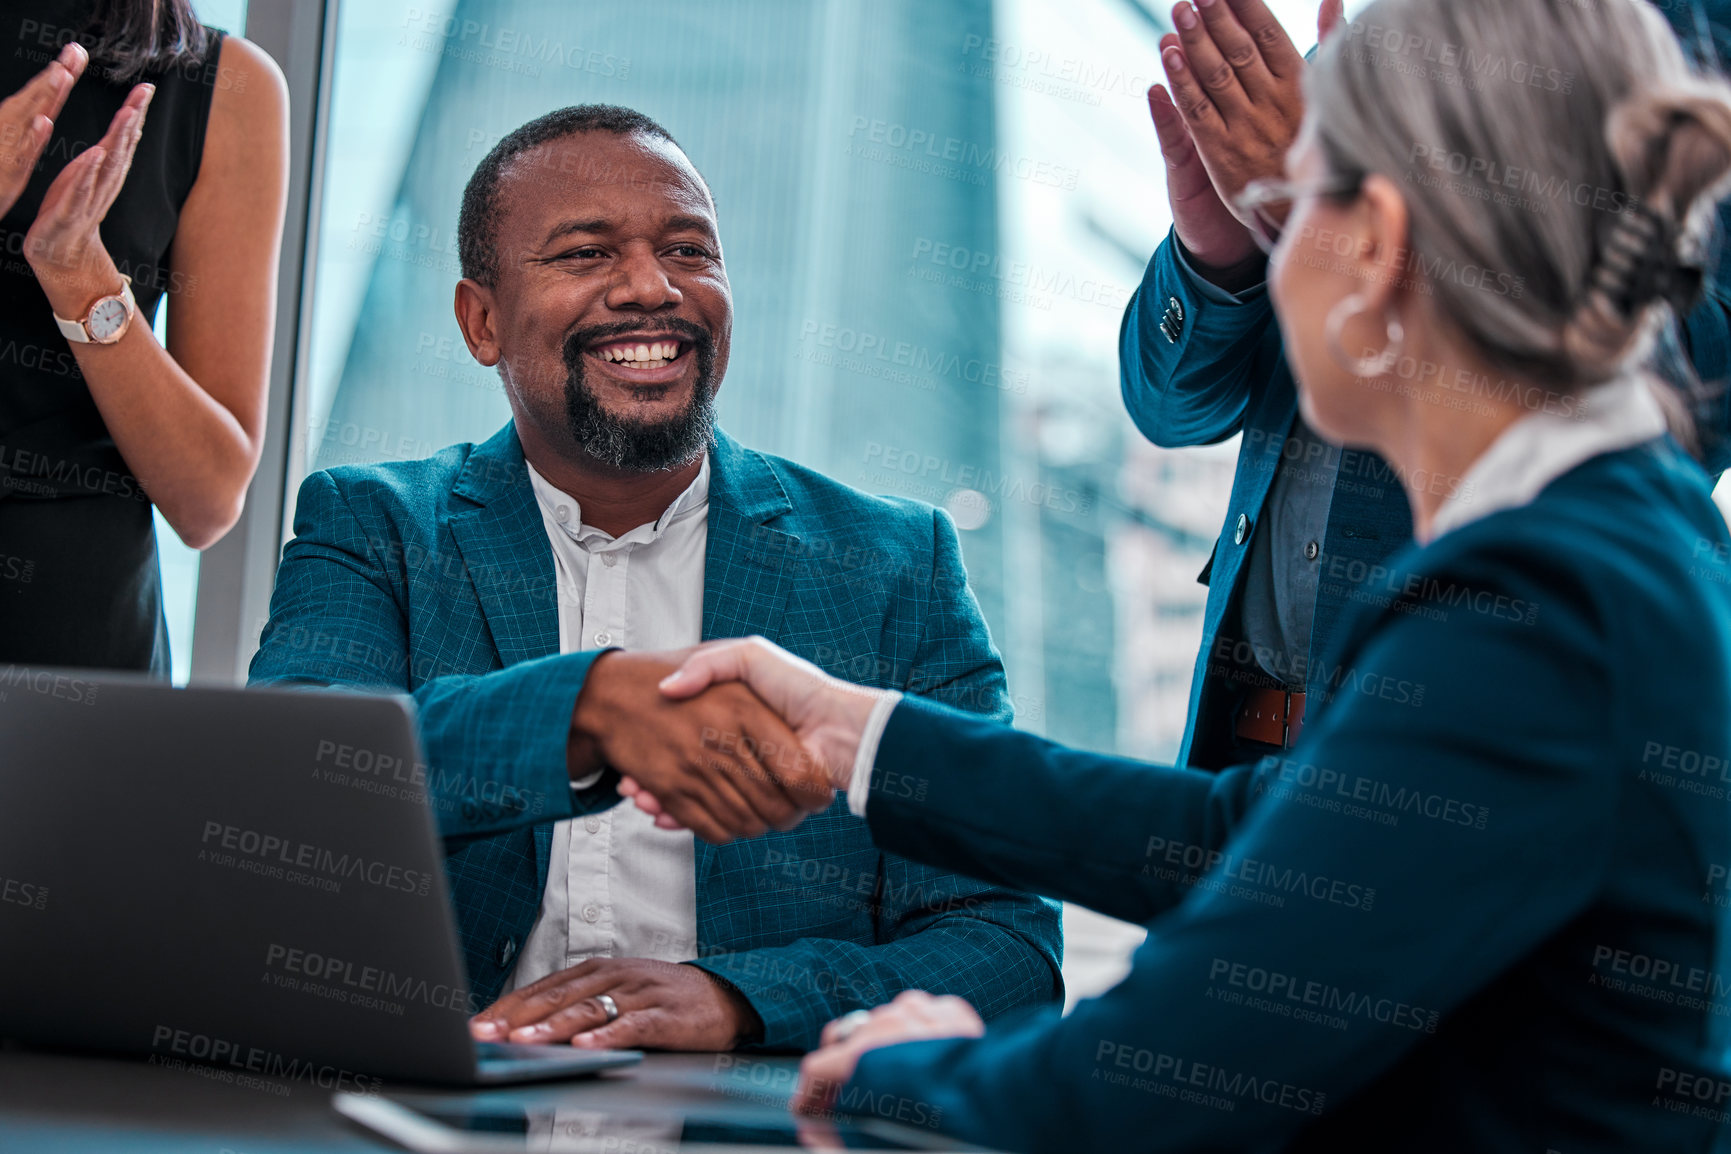 Buy stock photo Hiring success, meeting and business people with a handshake with applause at work. Happy, support and a black man shaking hands with a manager with workers clapping for partnership and welcome